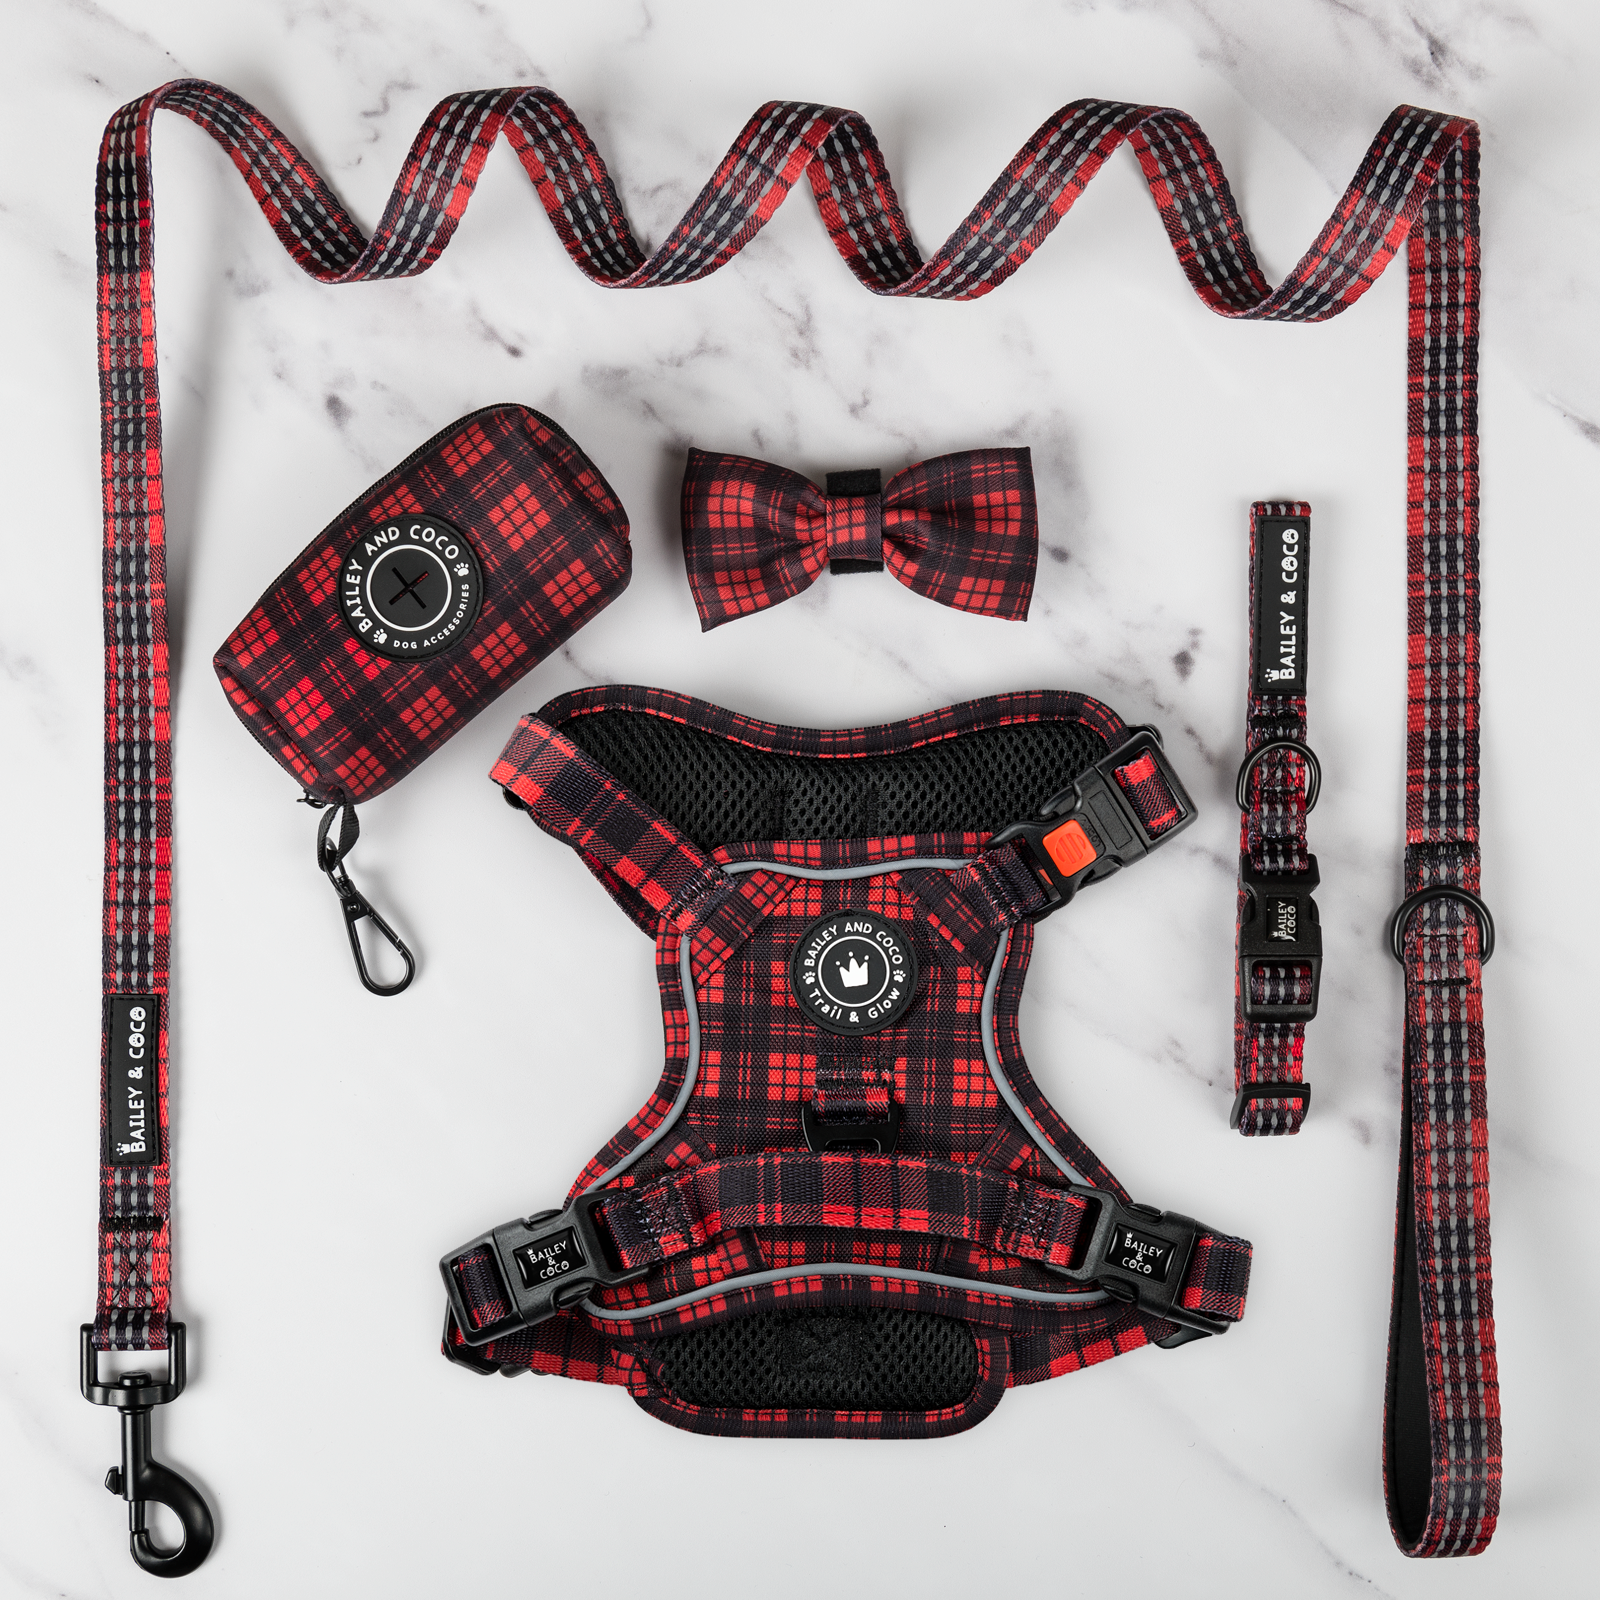 The Red Tartan One